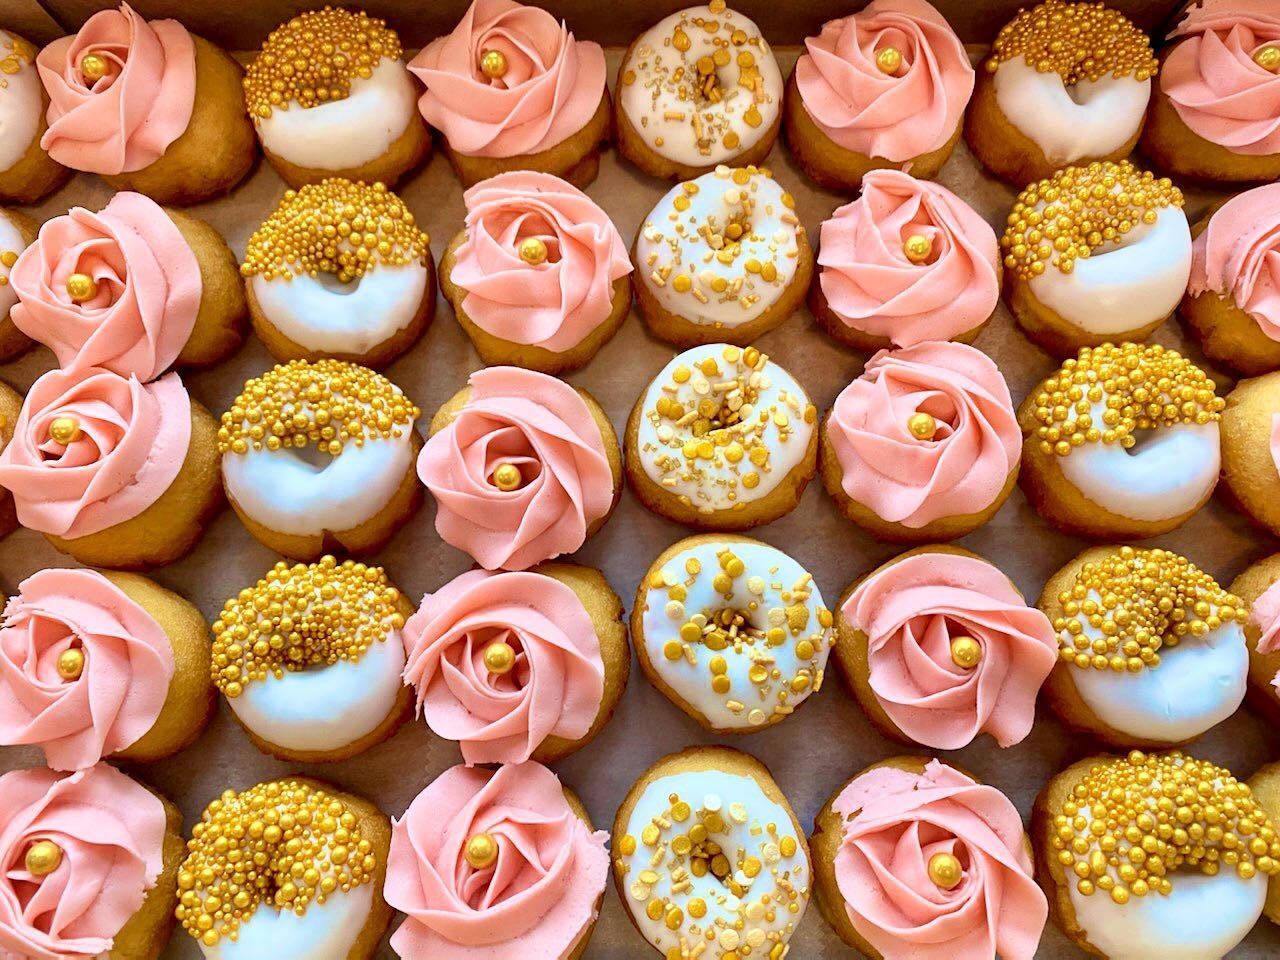 Pictured:Our most popular colors and designs. 😍
Need some custom donuts for your event this weekend? Get your orders in today to avoid the rush fee! 
https://minibardonuts.com/catering

&mdash;&mdash;
#minibardonuts #customdonuts #pink #gold #minido